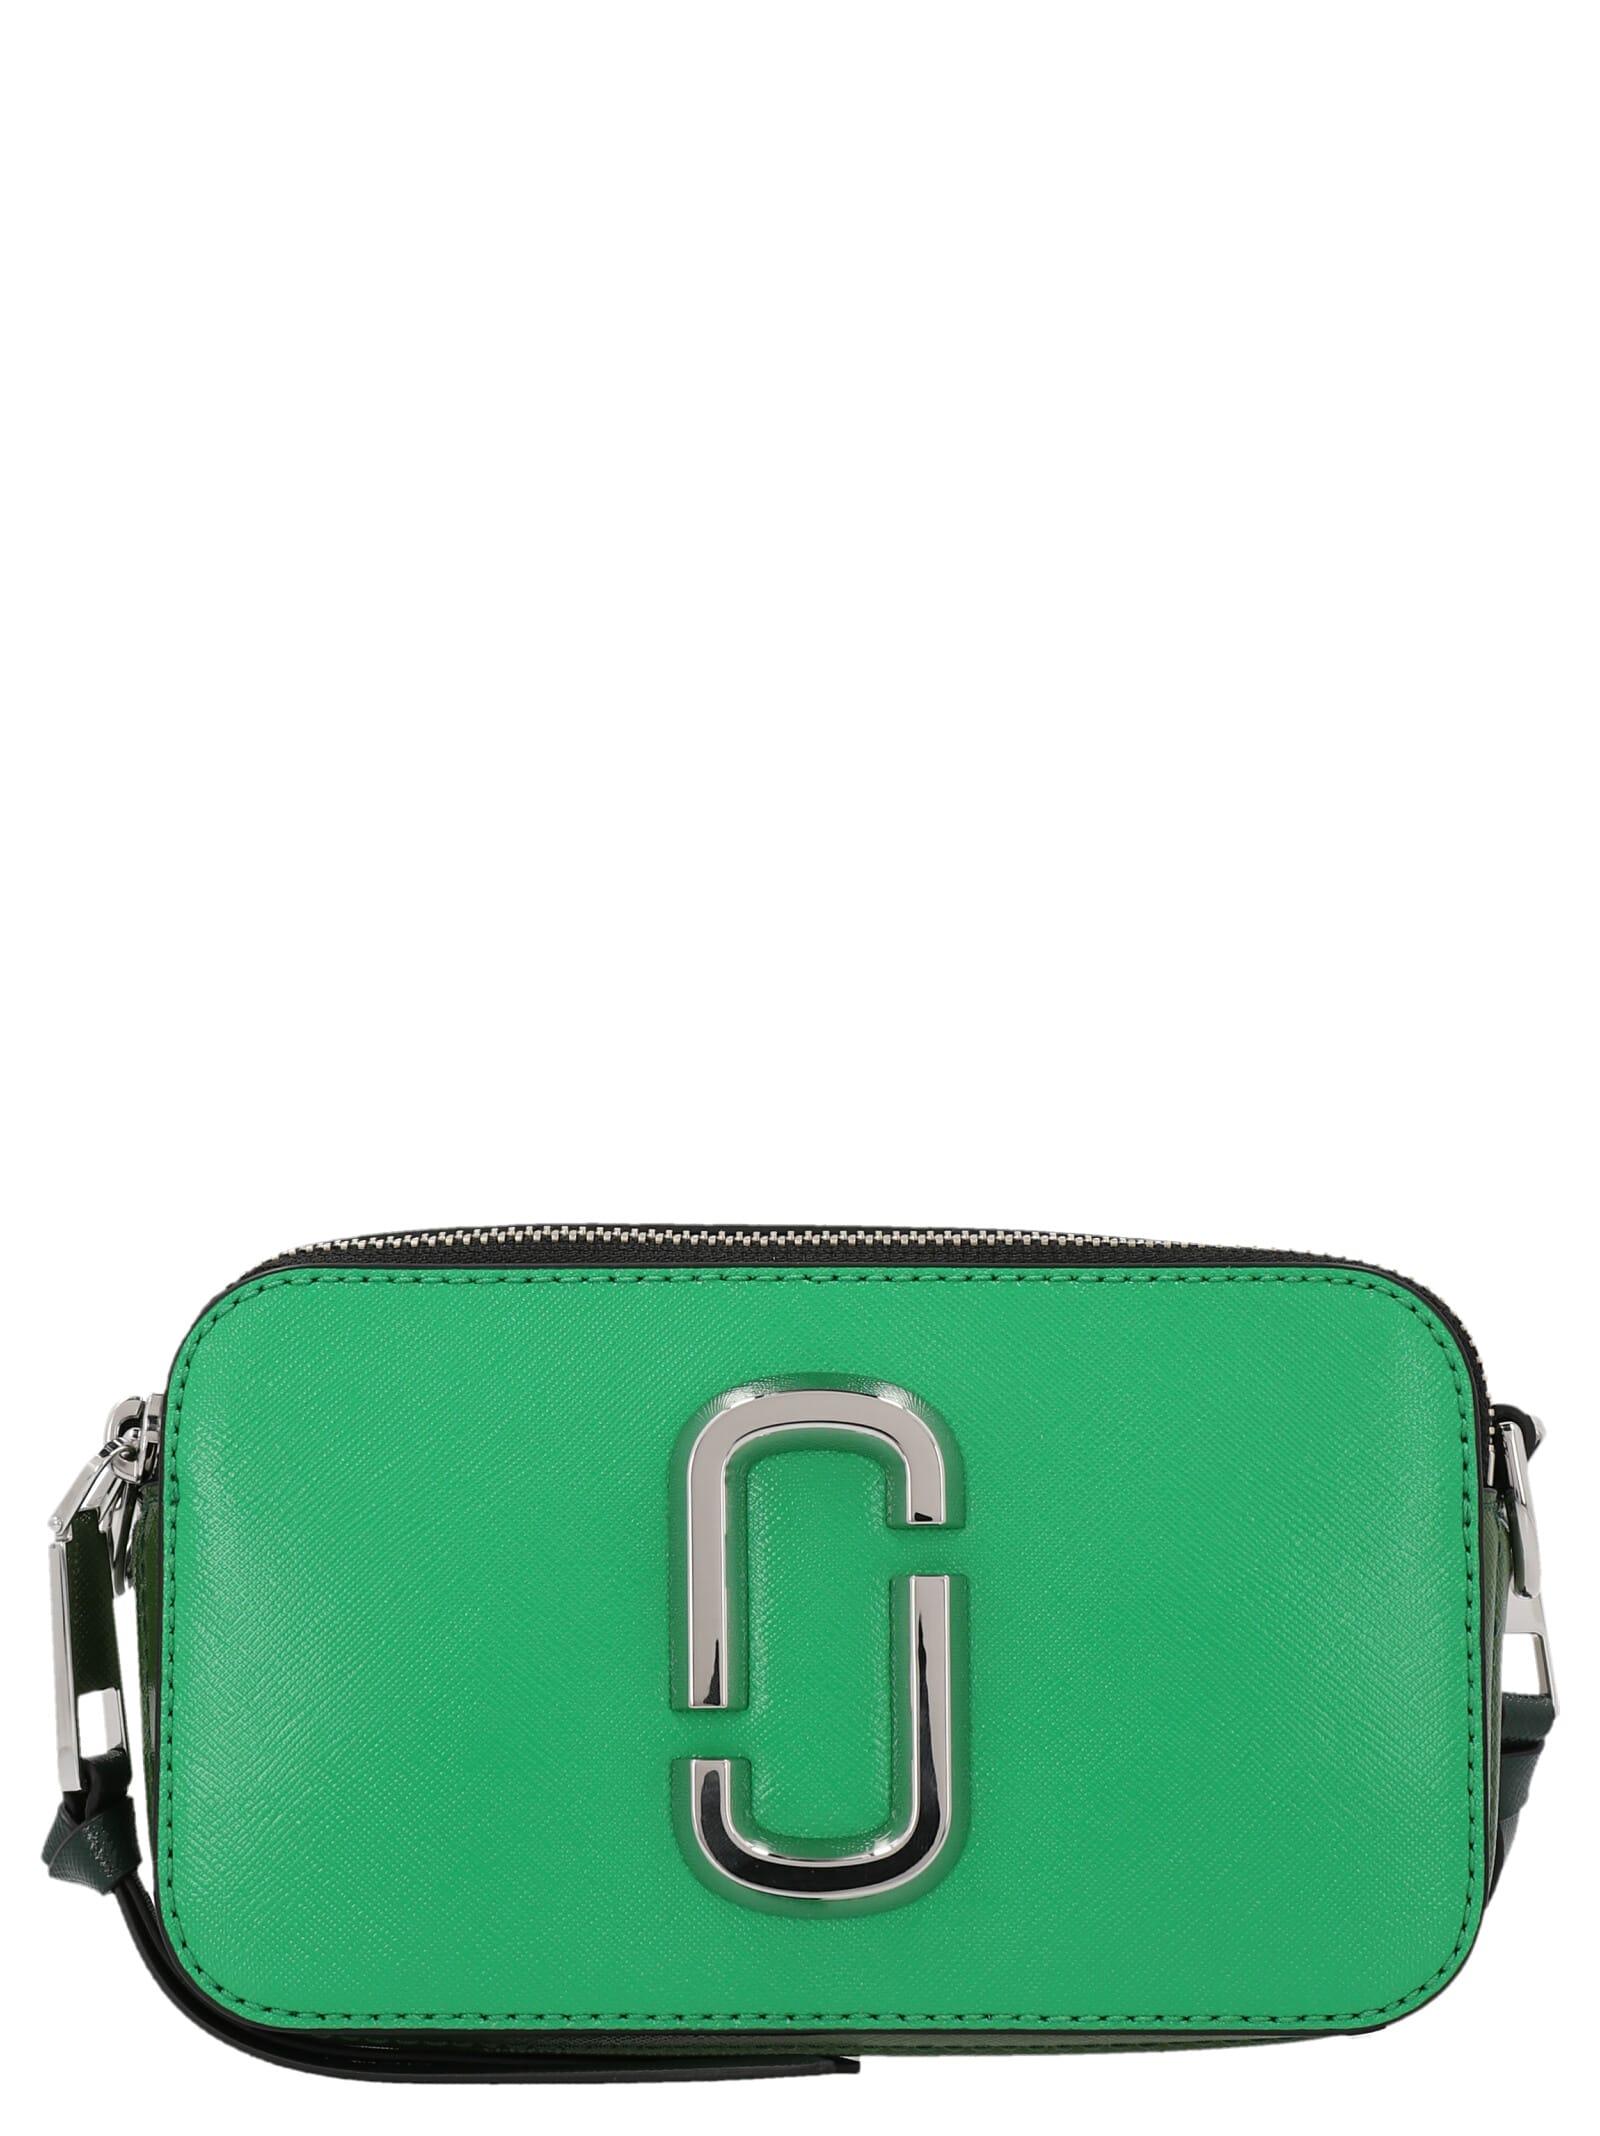 Save 11% Womens Shoulder bags Marc Jacobs Shoulder bags Marc Jacobs Leather The Snapshot Crossbody Bag in Green 